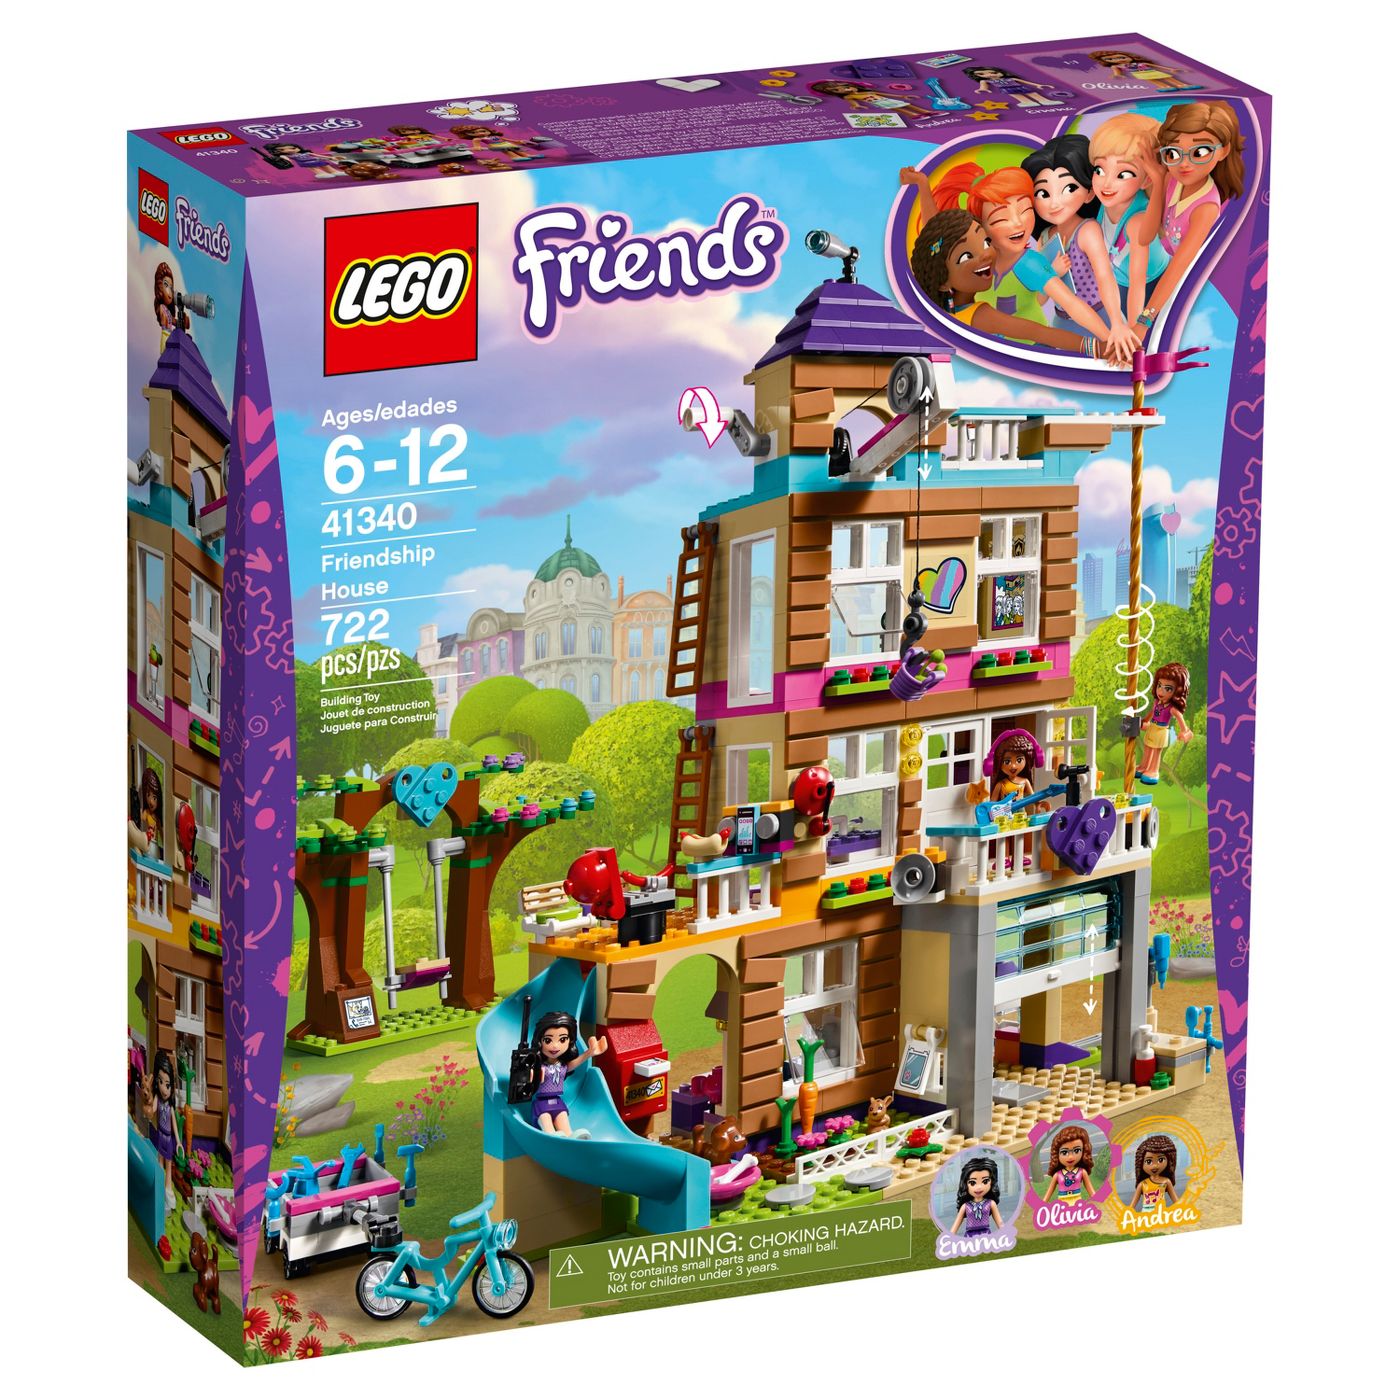 Target In Store Lego Friends Friendship House 41340 For